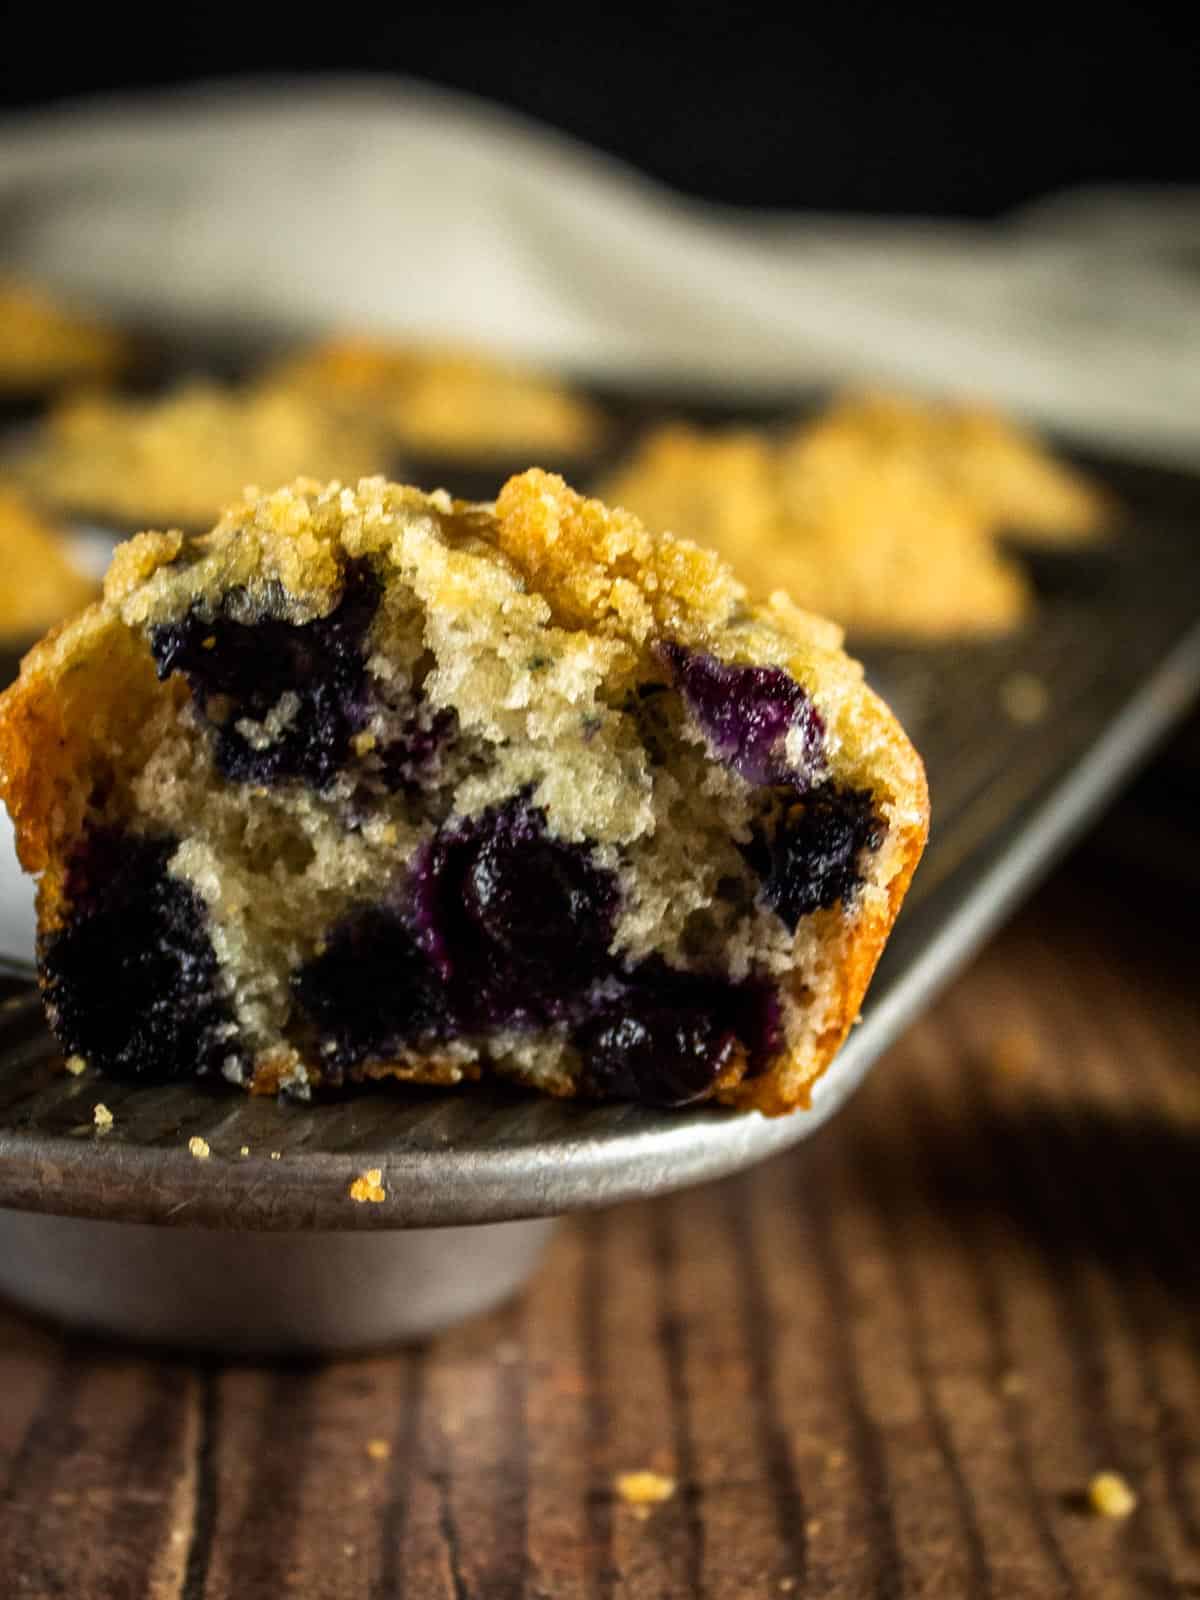 inside of a baked blueberry muffin